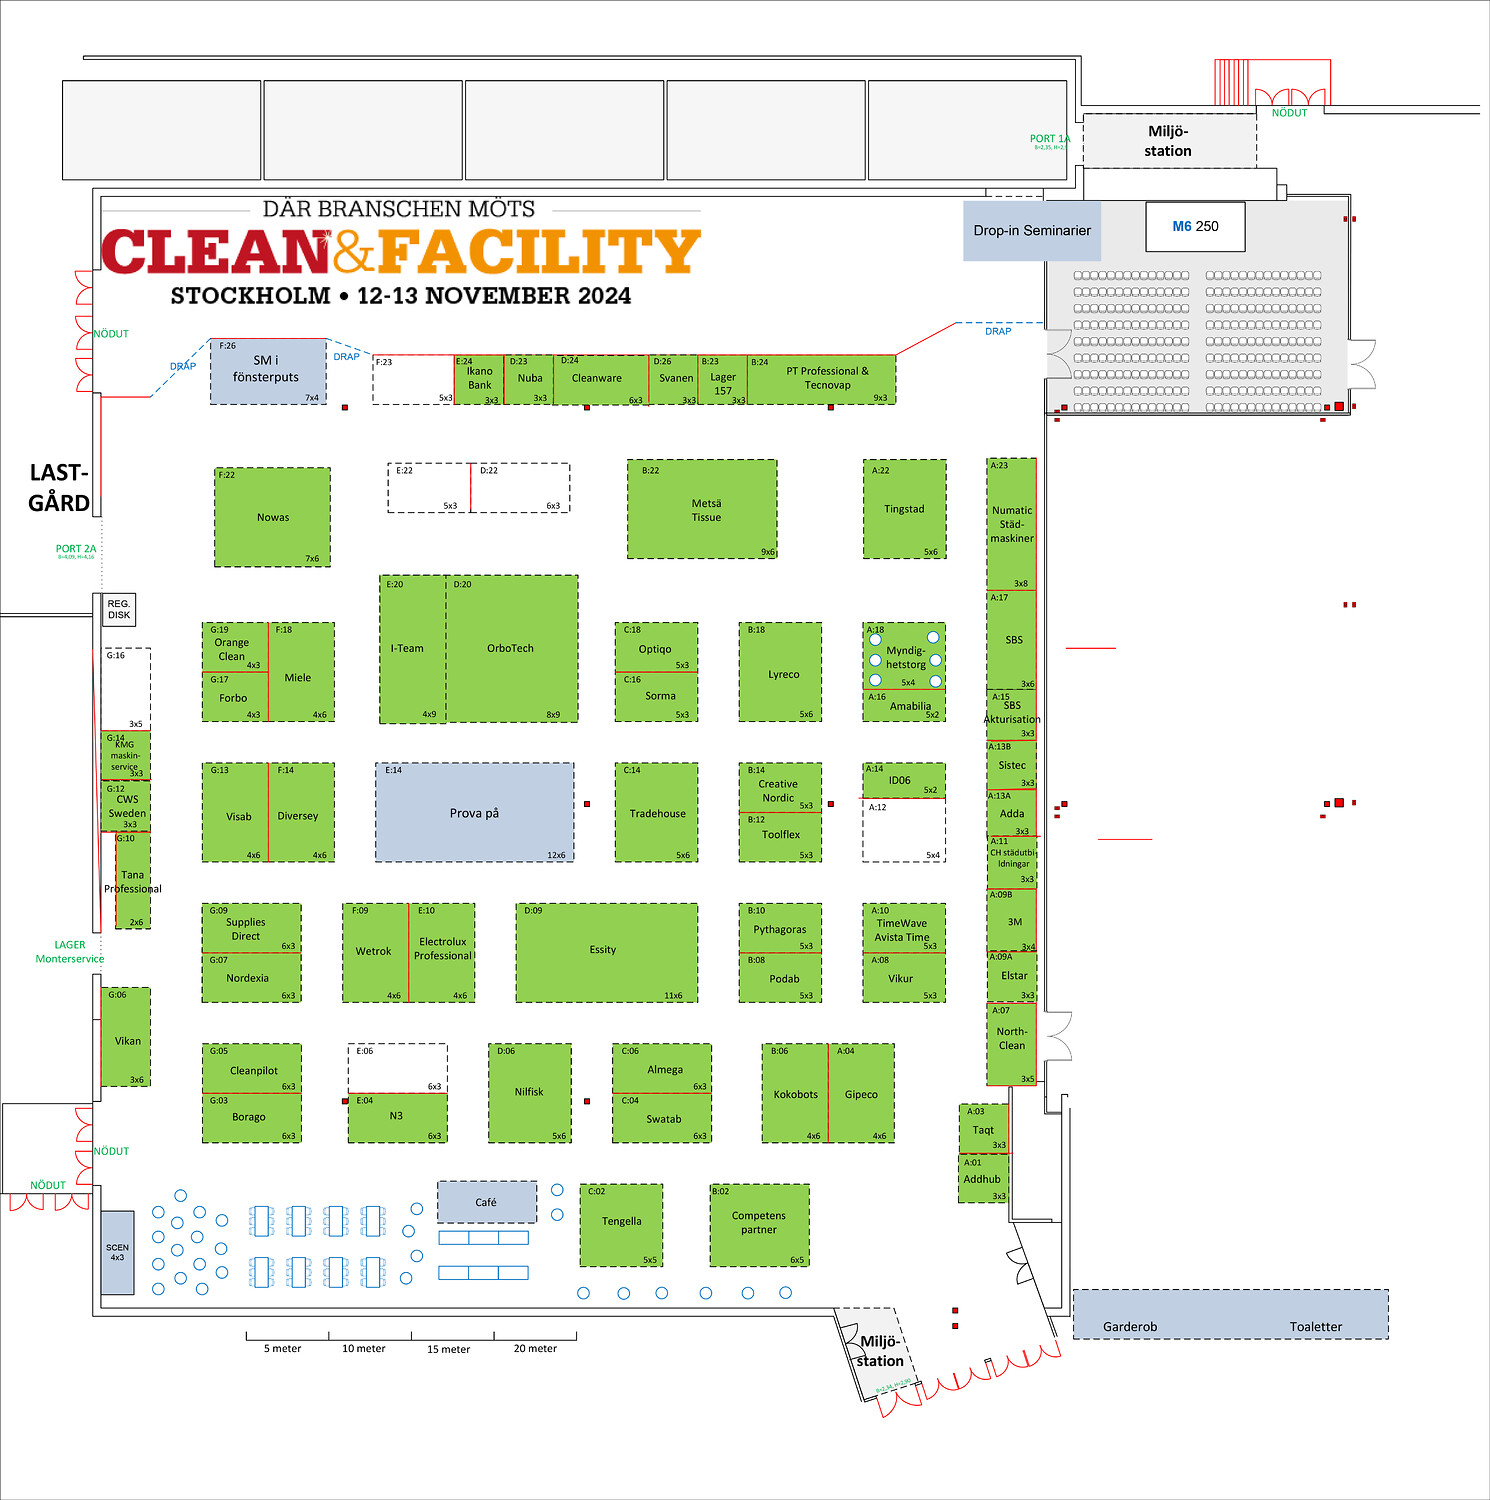 Clean & Facility 2024 hall overview